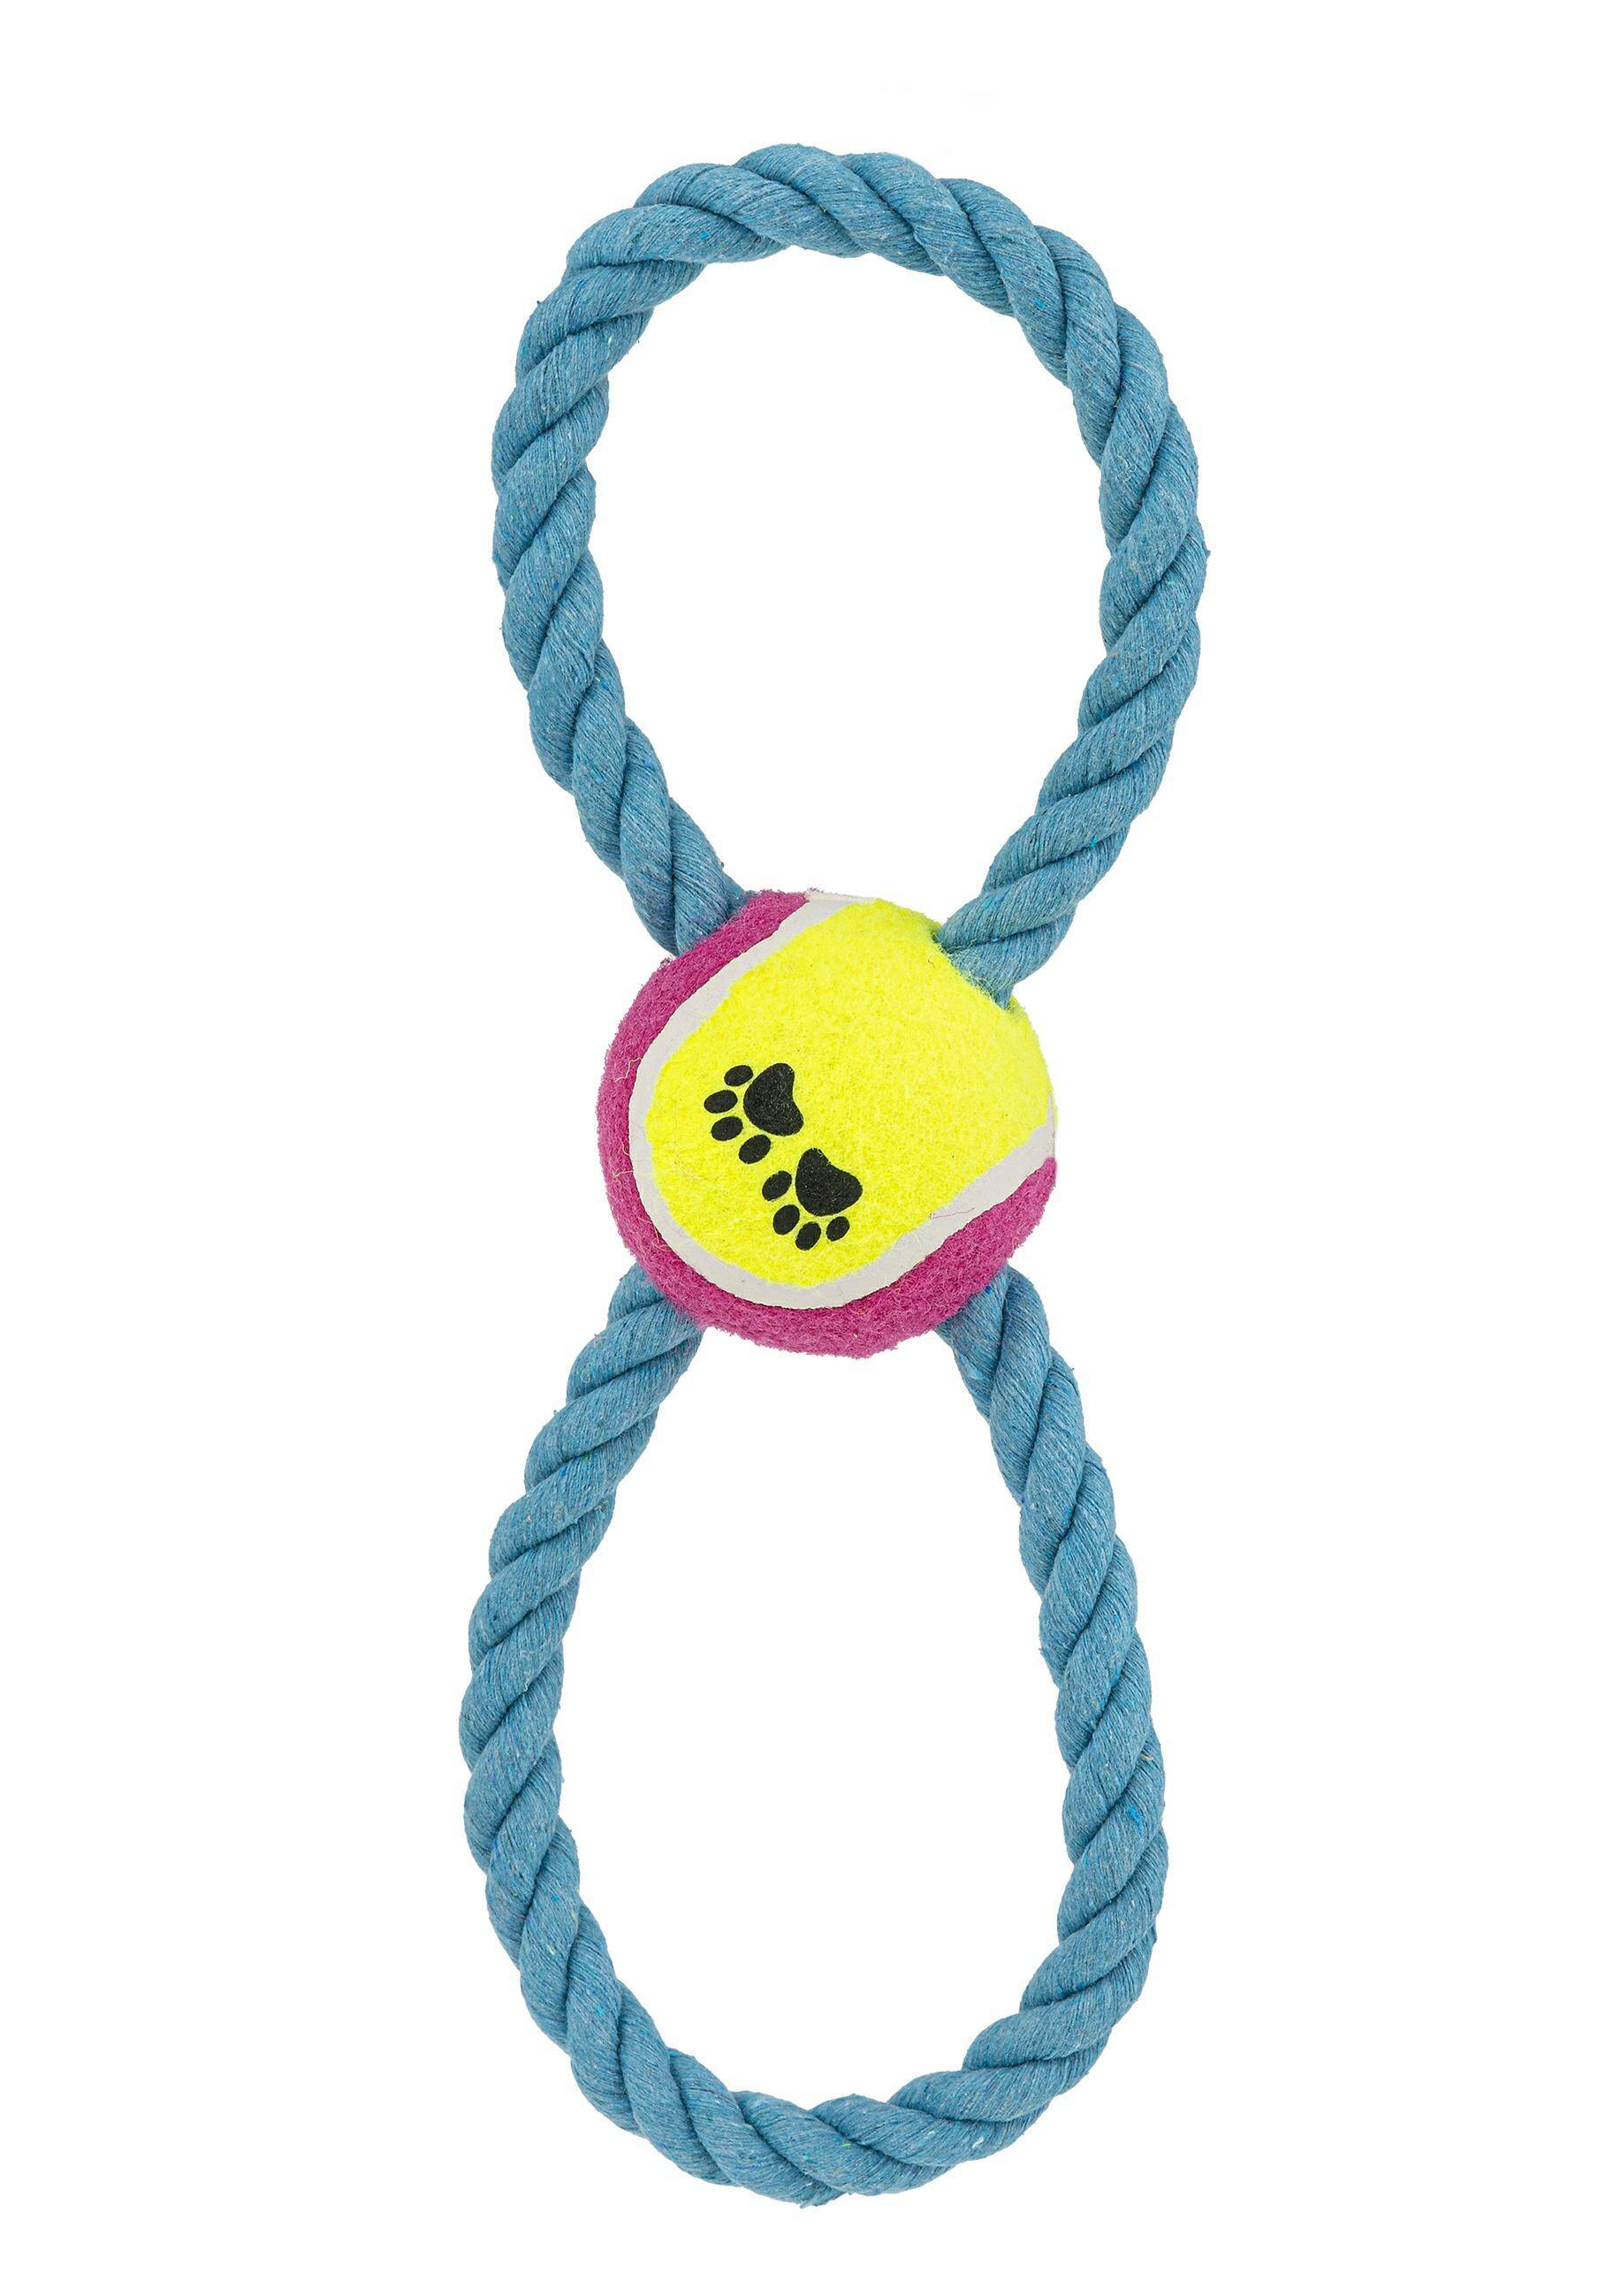 Rope Toy with Ball